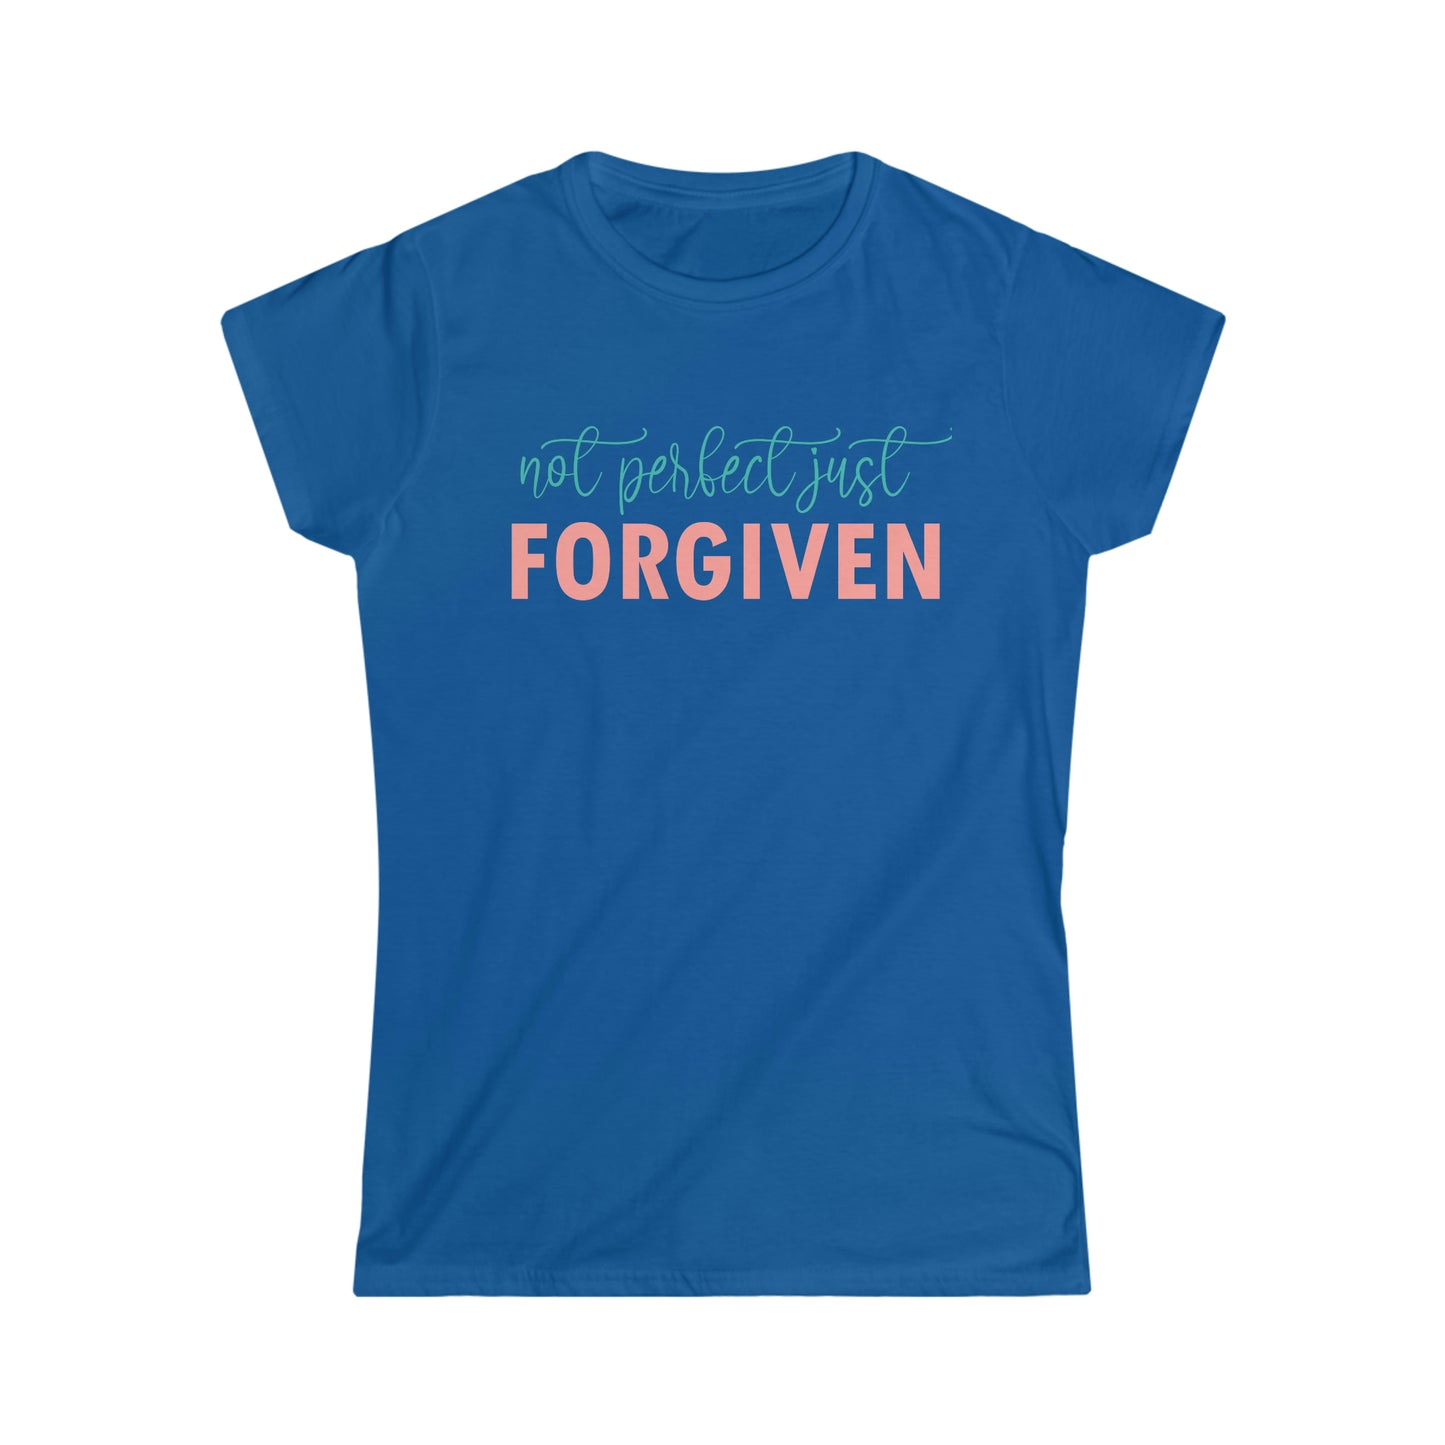 Christian (Not Perfect Just Forgiven/ Women's Softstyle Tee)